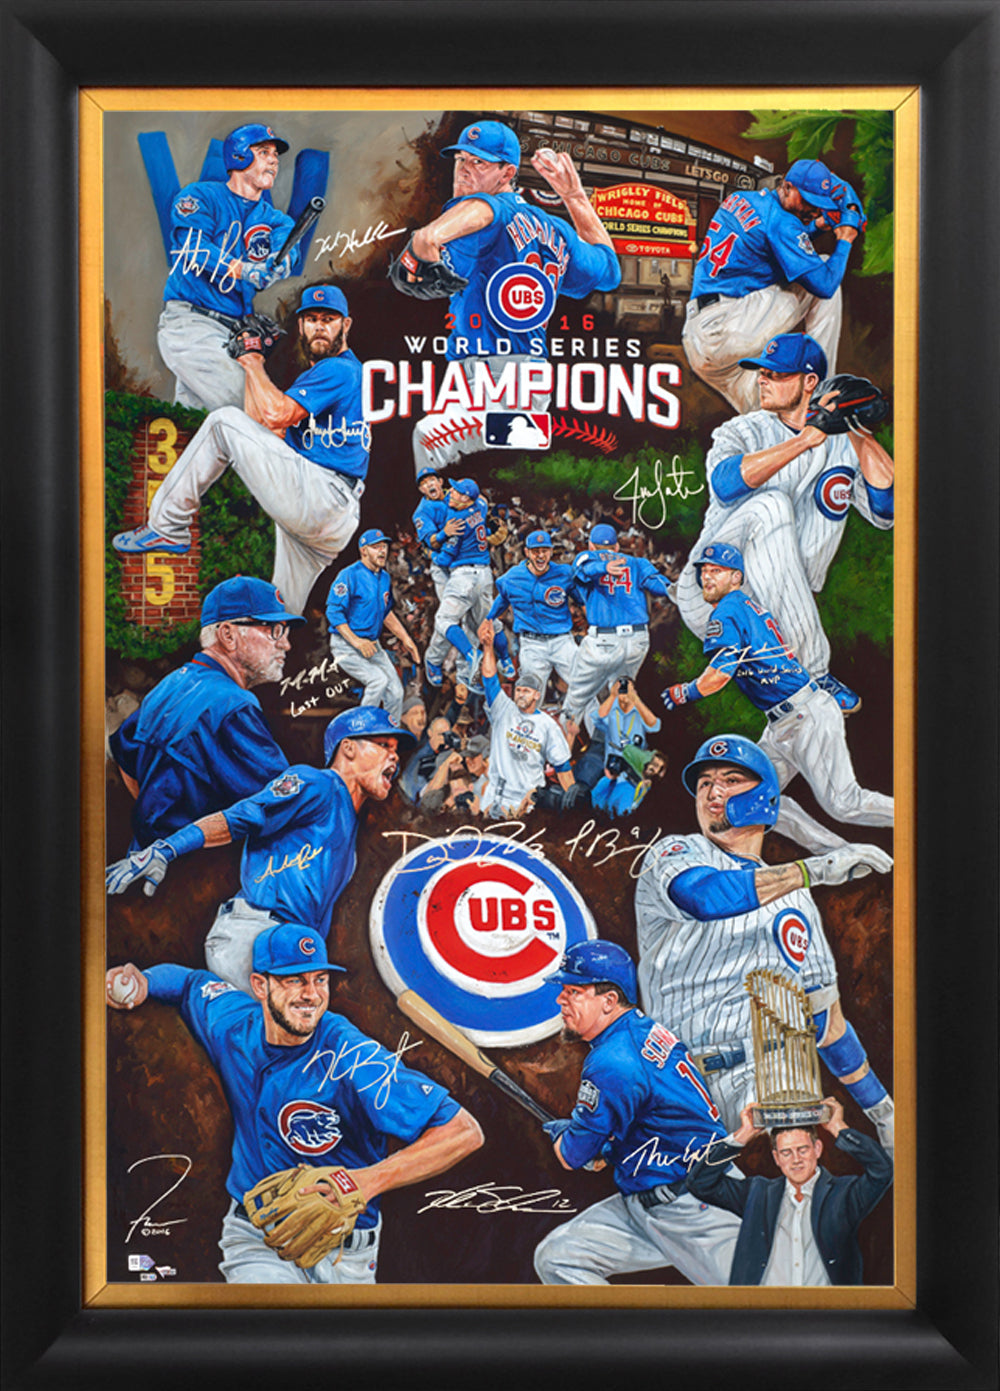 Anthony Rizzo Paintings & Artwork for Sale